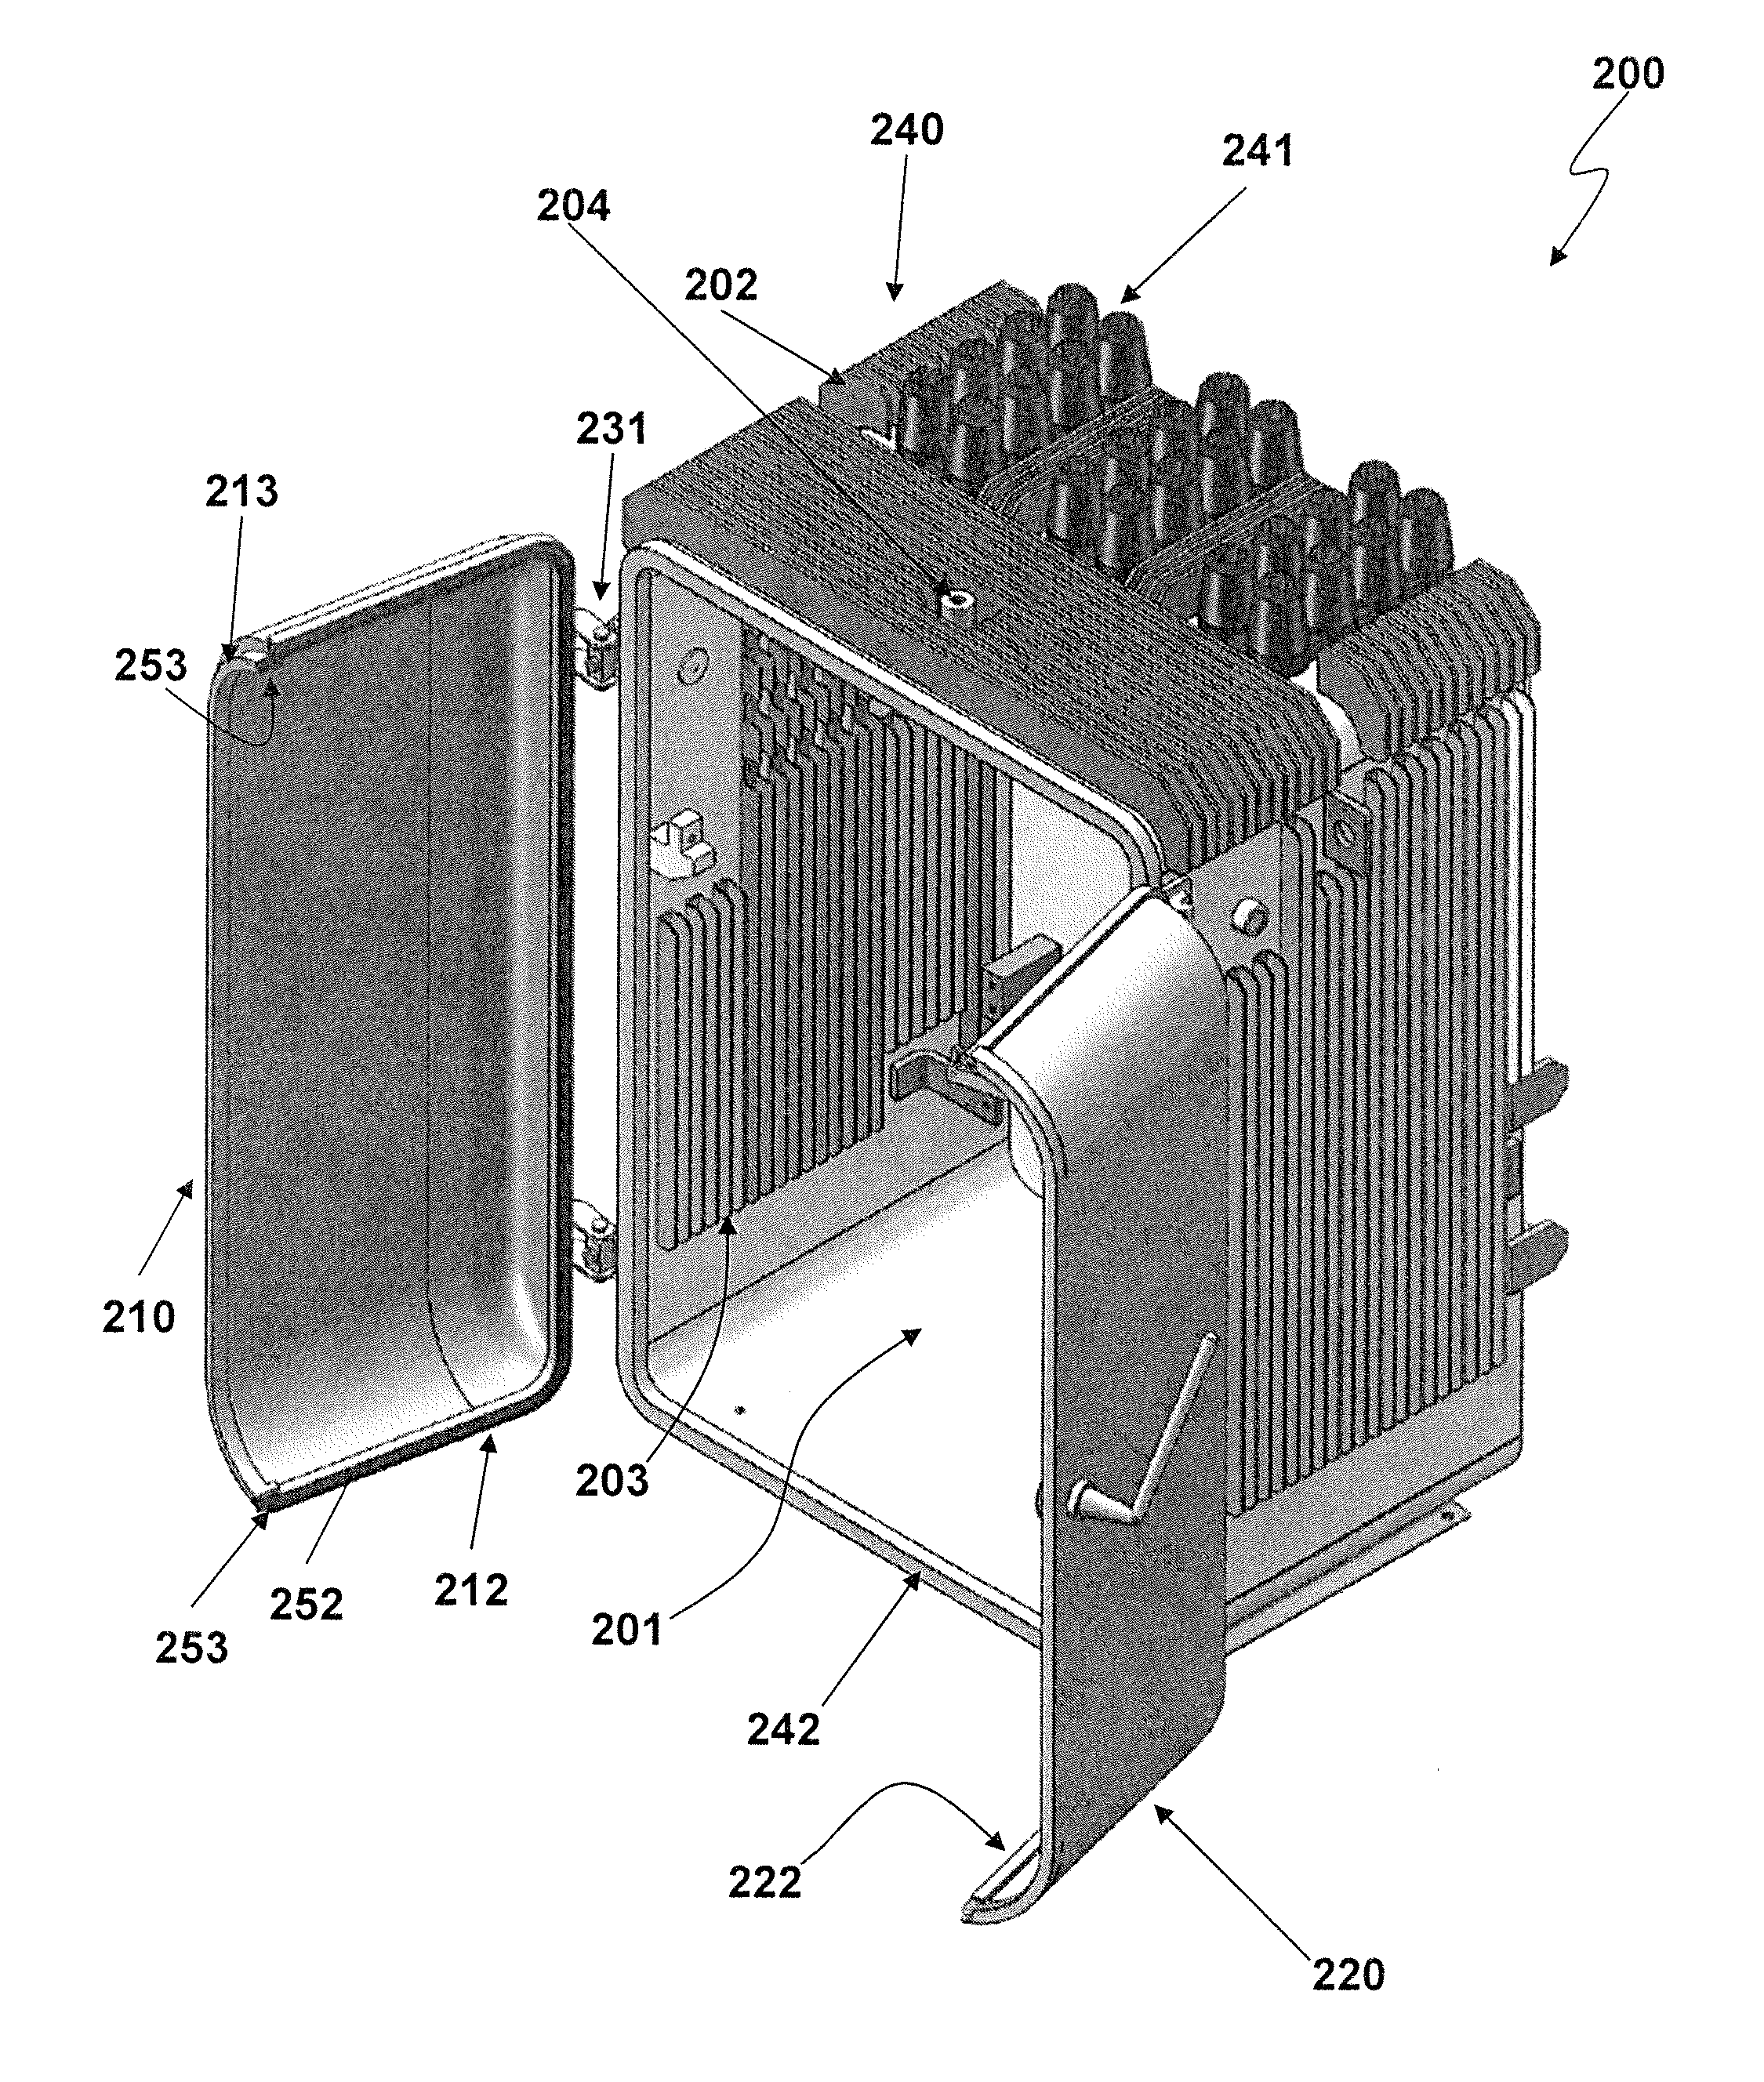 Enclosure for submersible network protectors